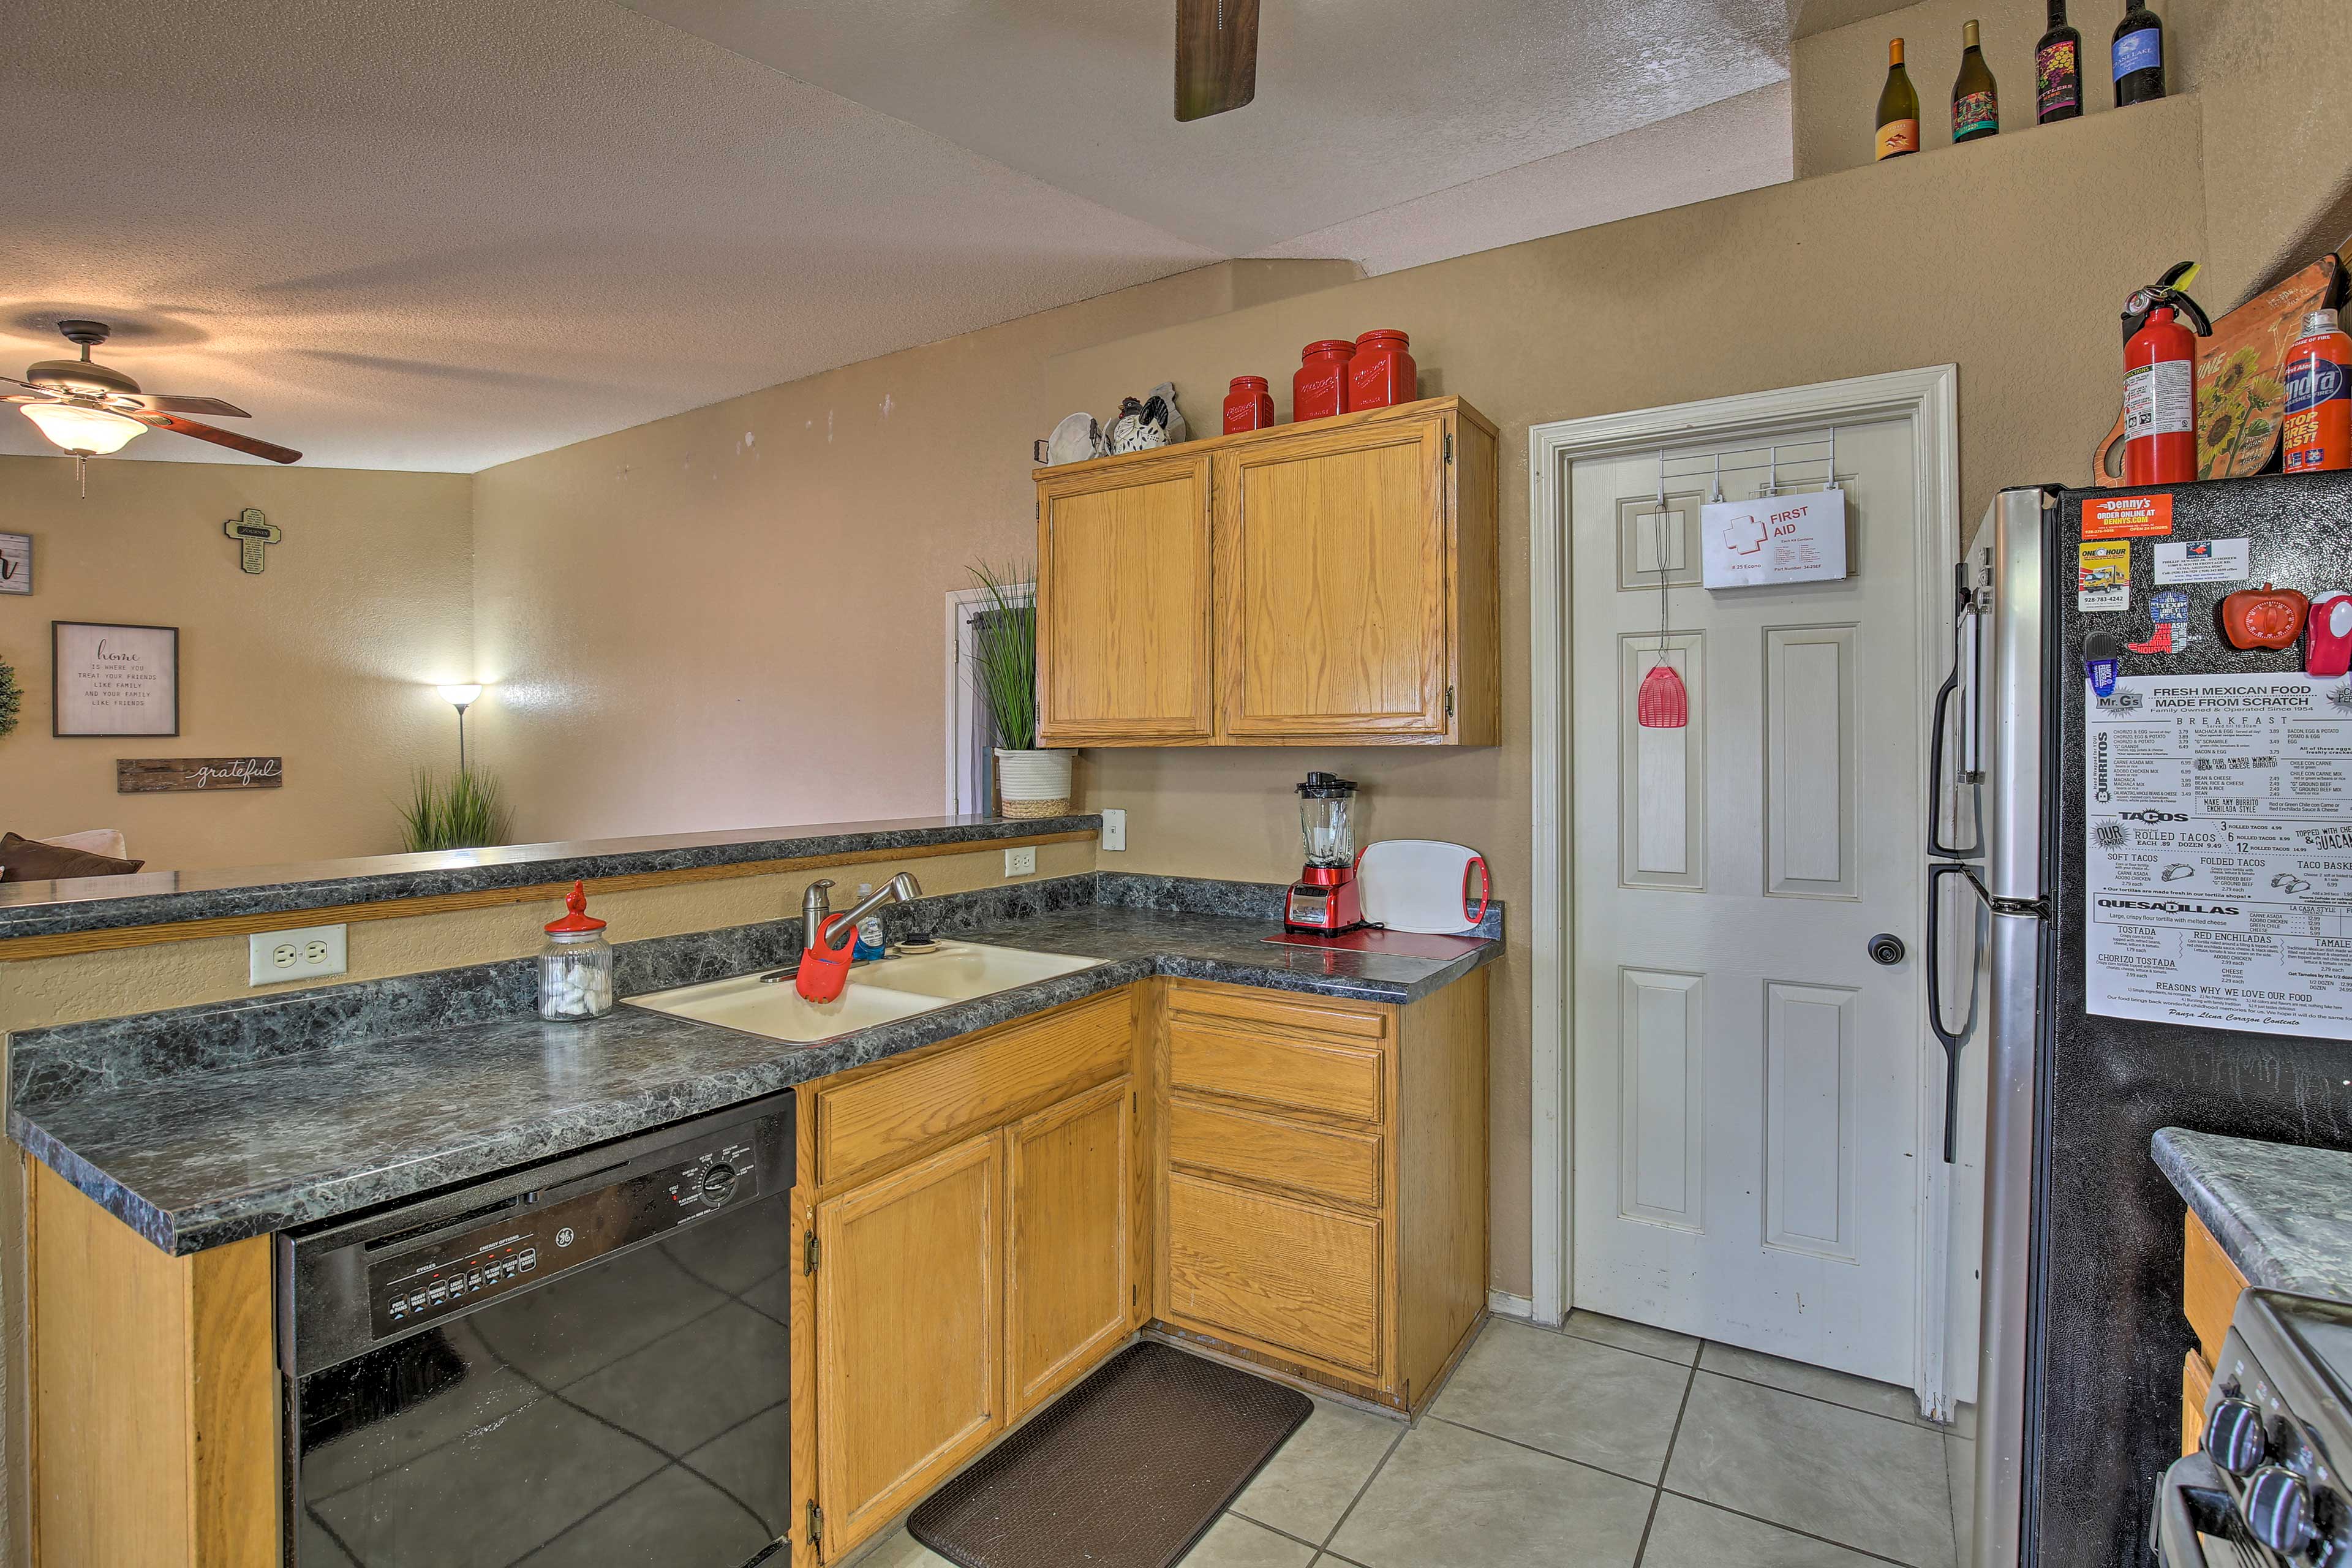 There's ample counter space in the fully equipped kitchen.